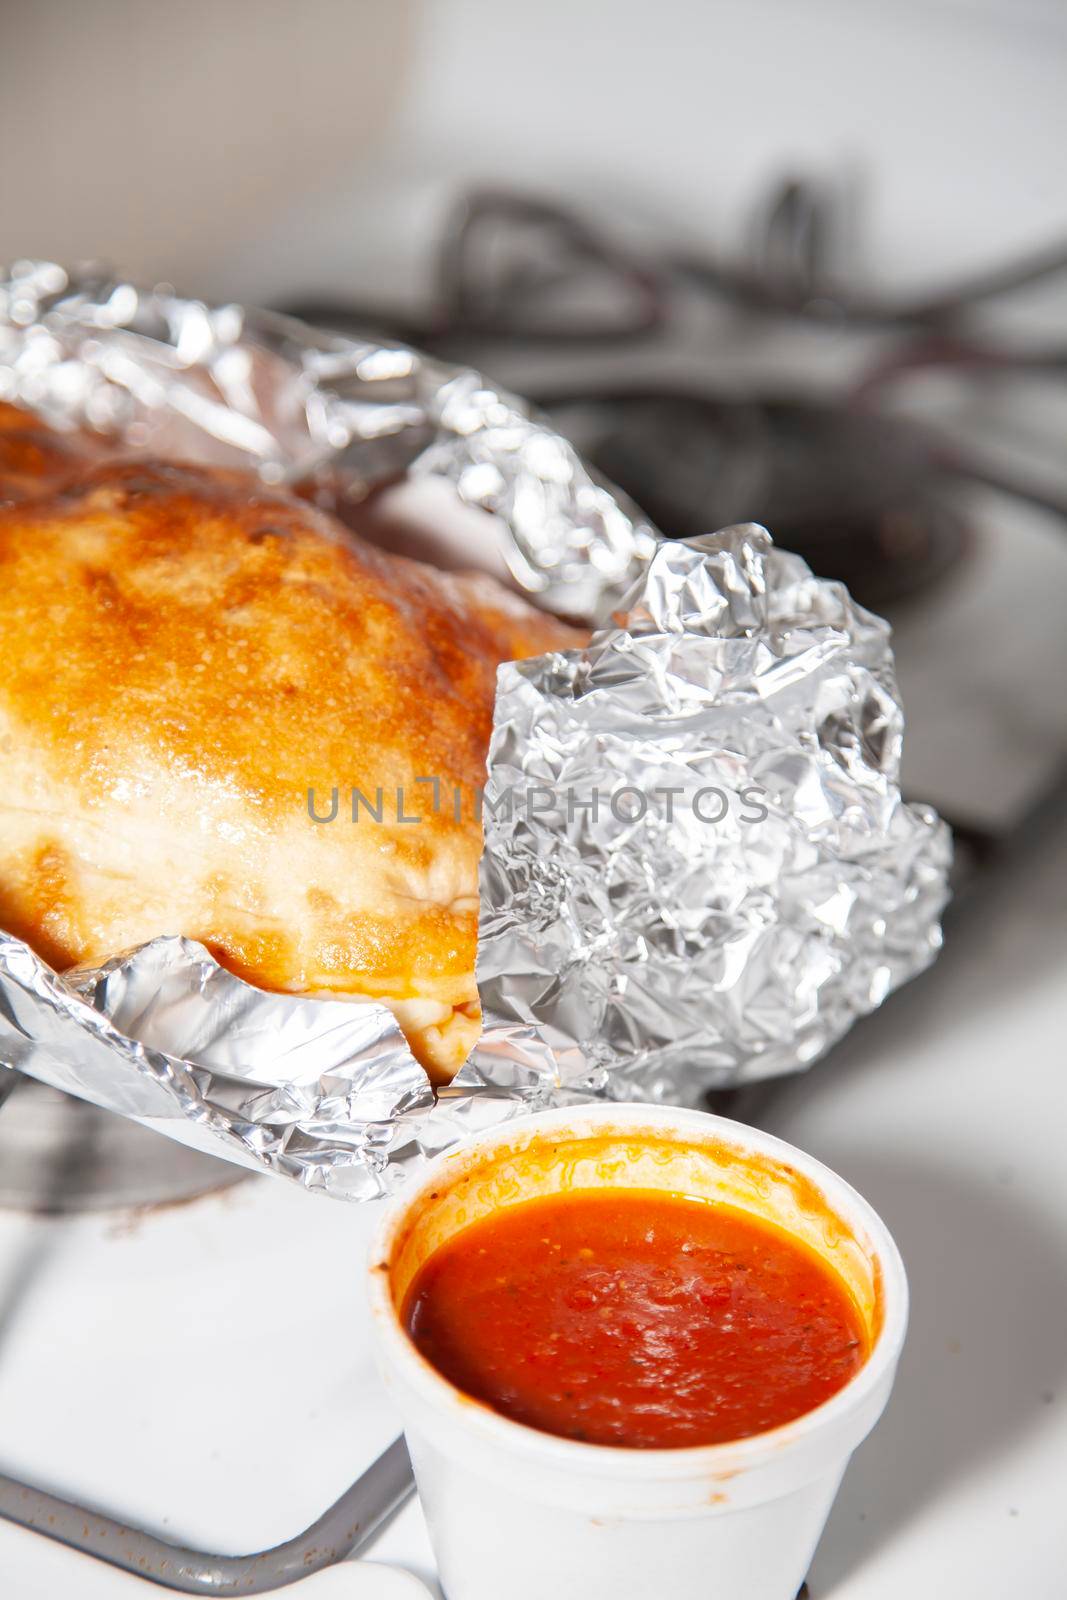 Glazed outter bread of a fresh calzone on foil next to a styrofoam cup of marinara sauce